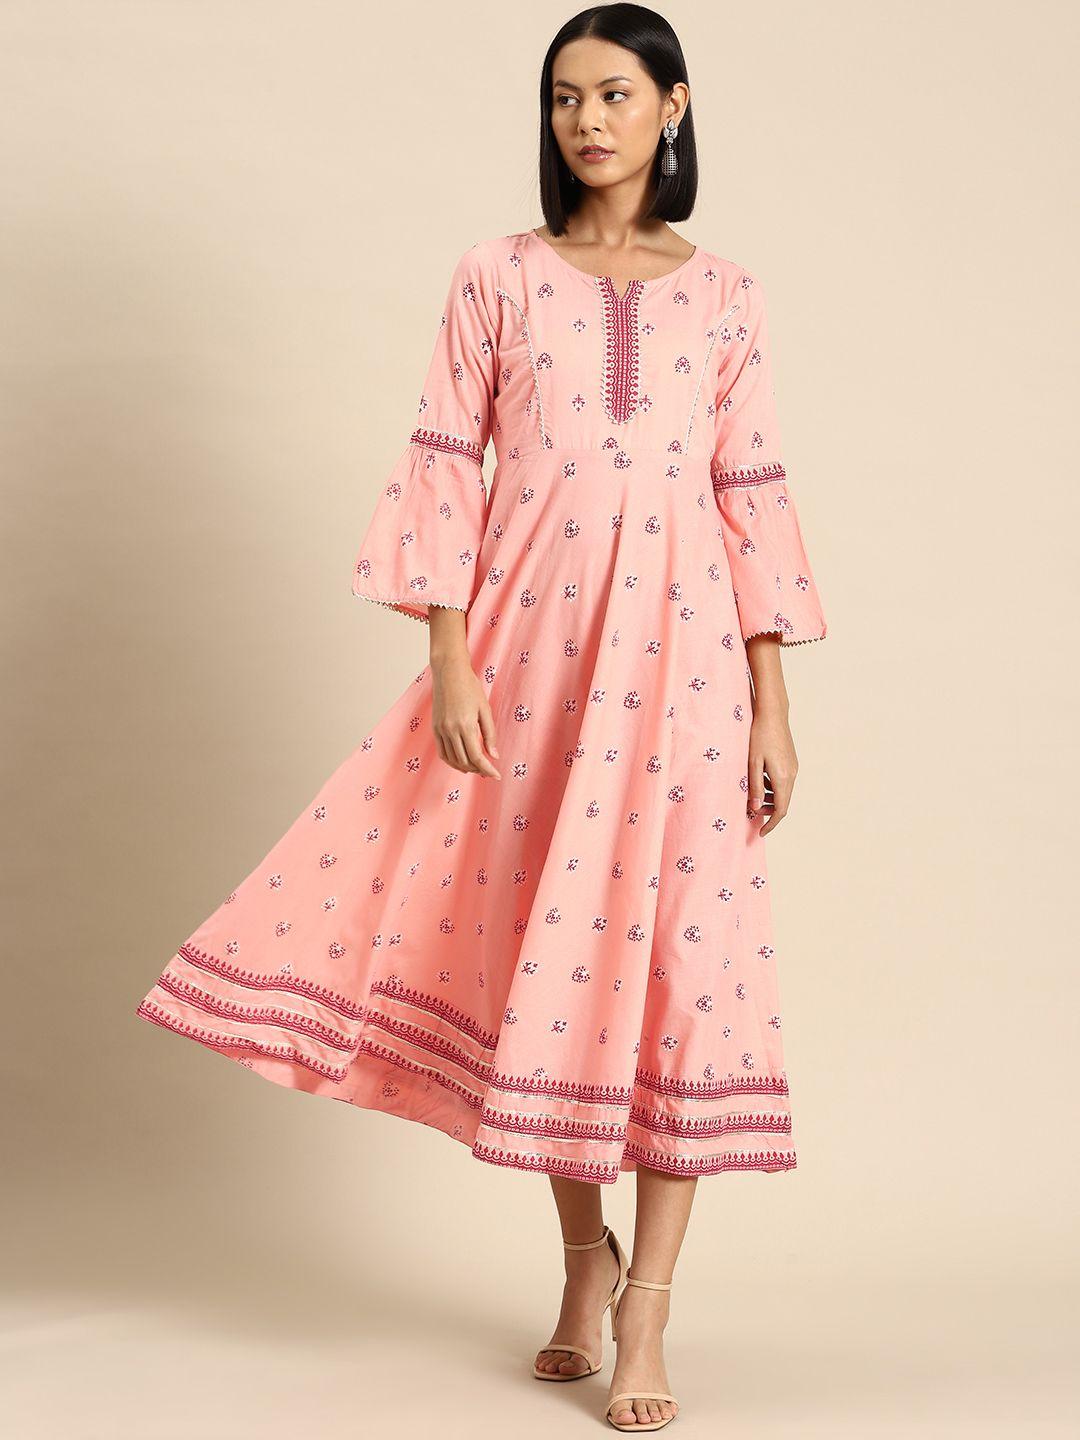 all-about-you-floral-print-bell-sleeves-embellished-a-line-midi-dress